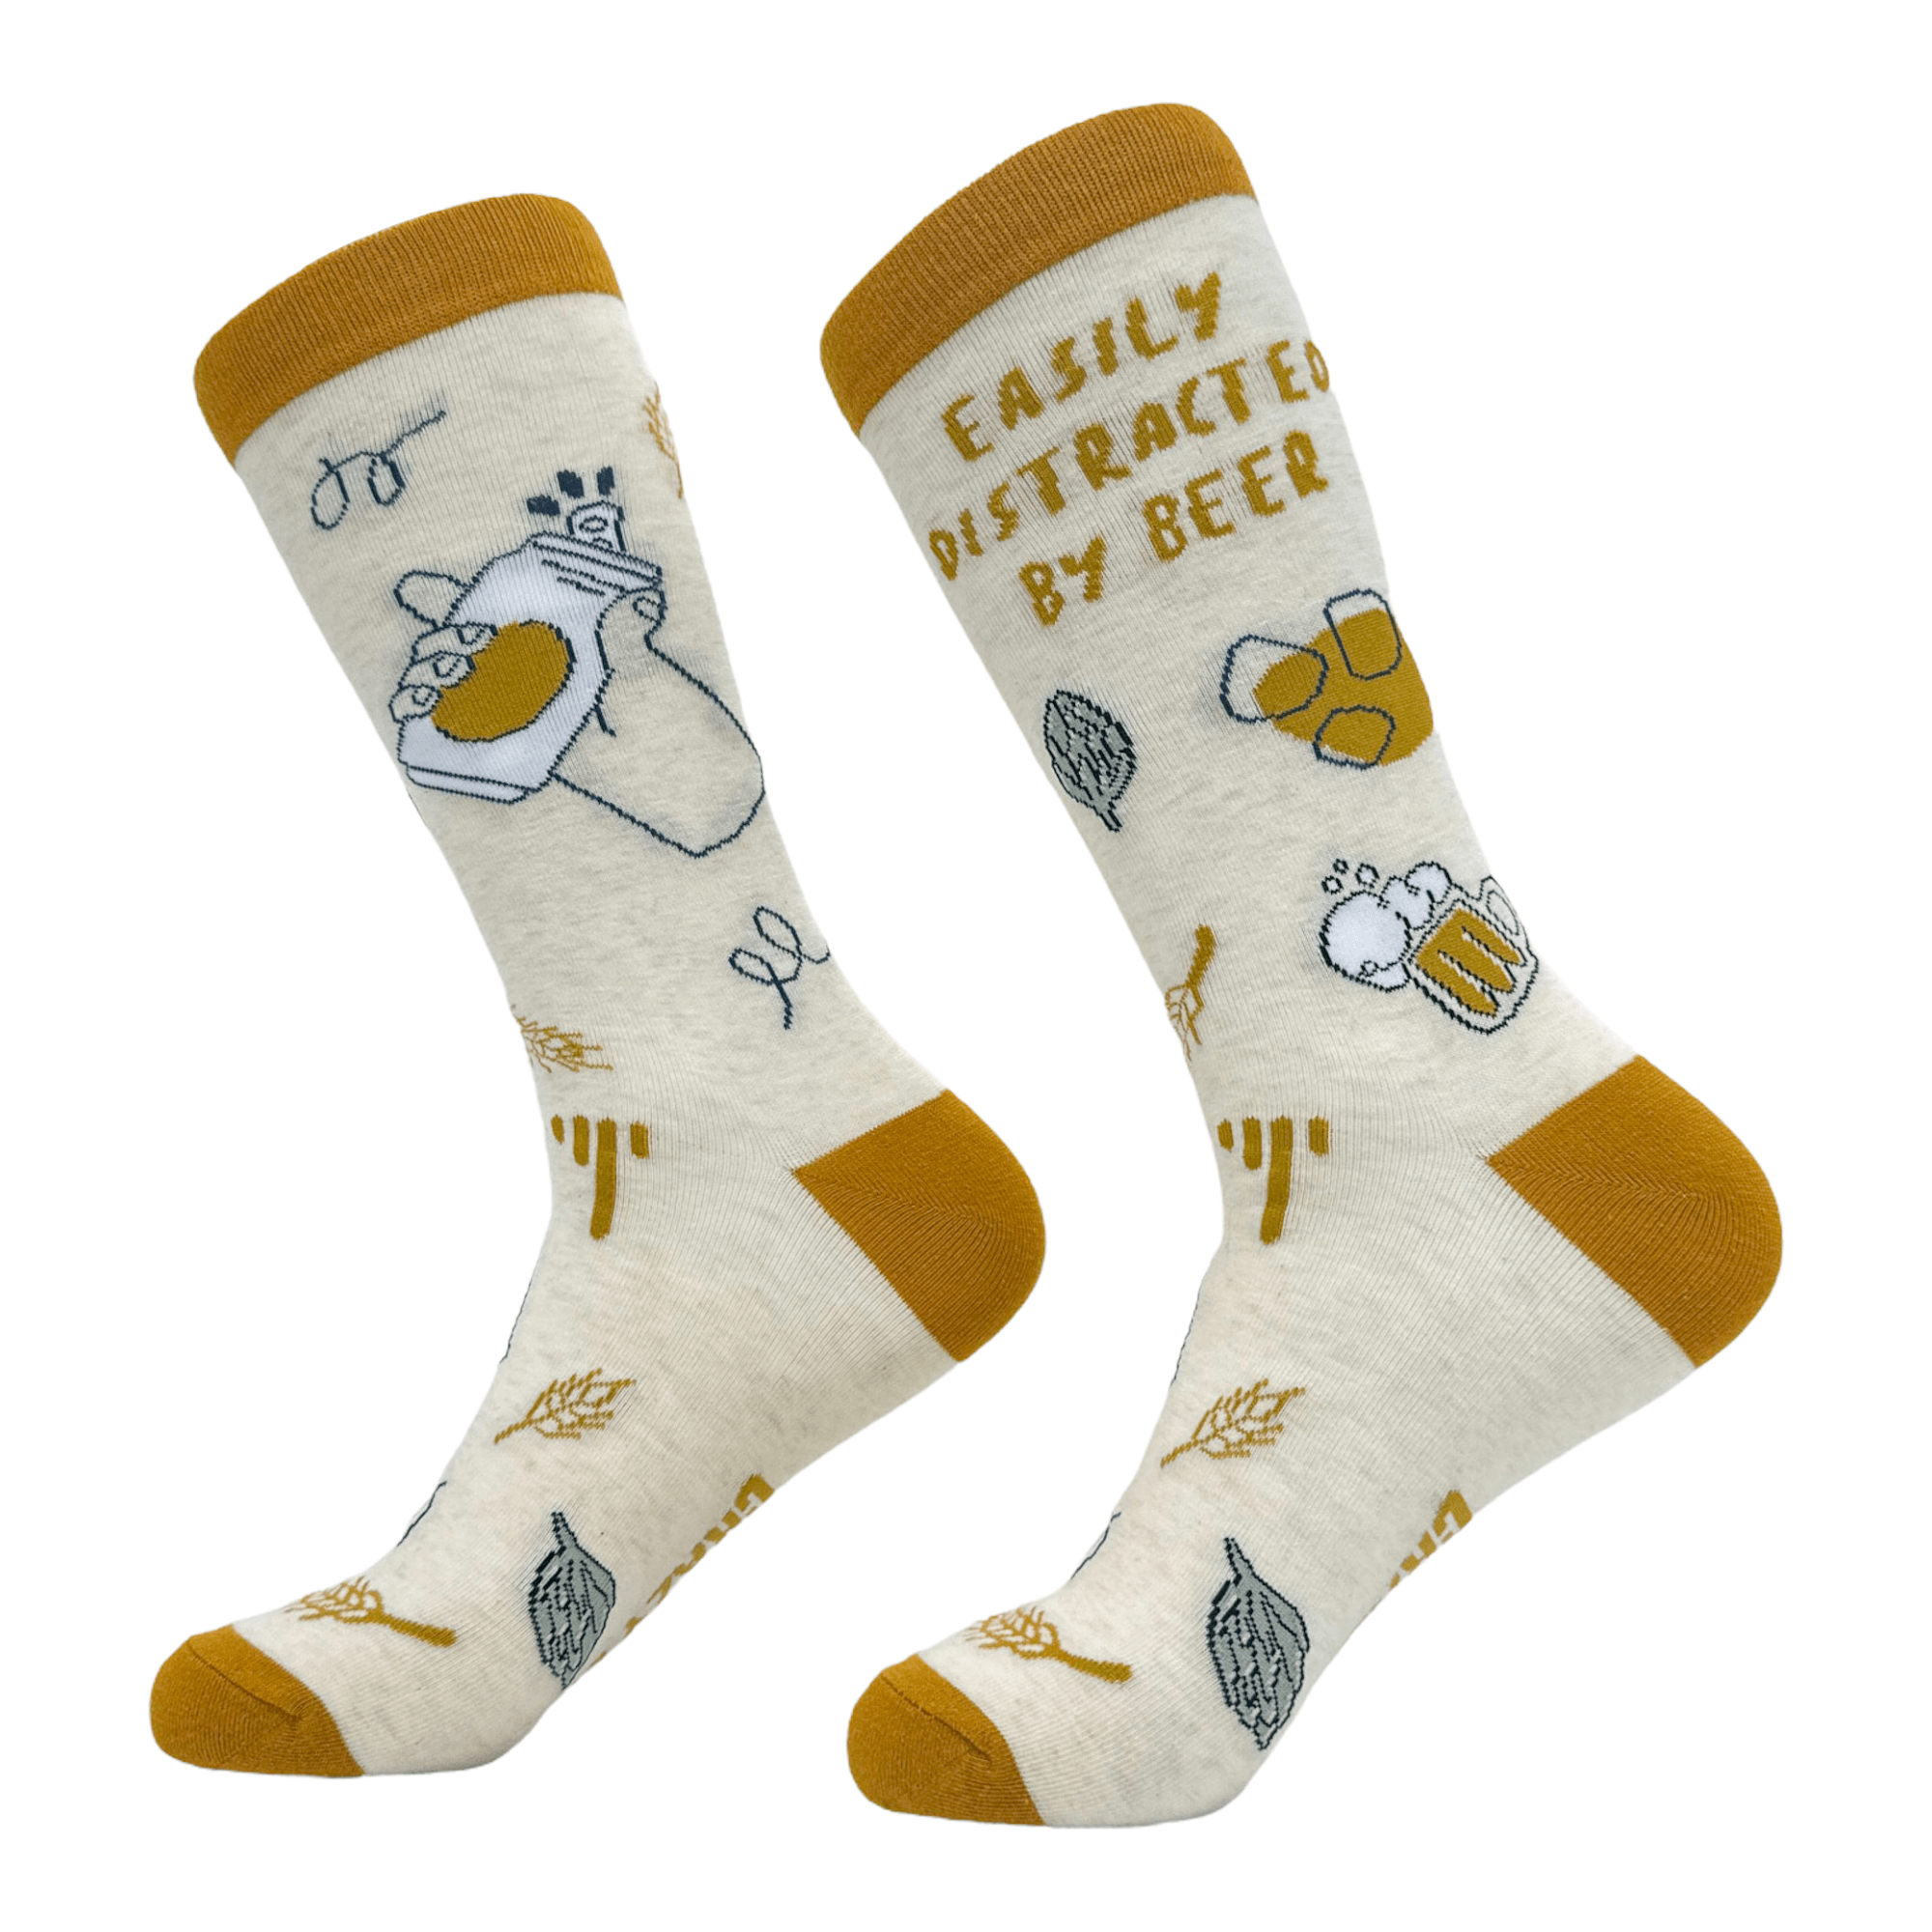 Men's Easily Distracted By Beer Socks  -  Crazy Dog T-Shirts